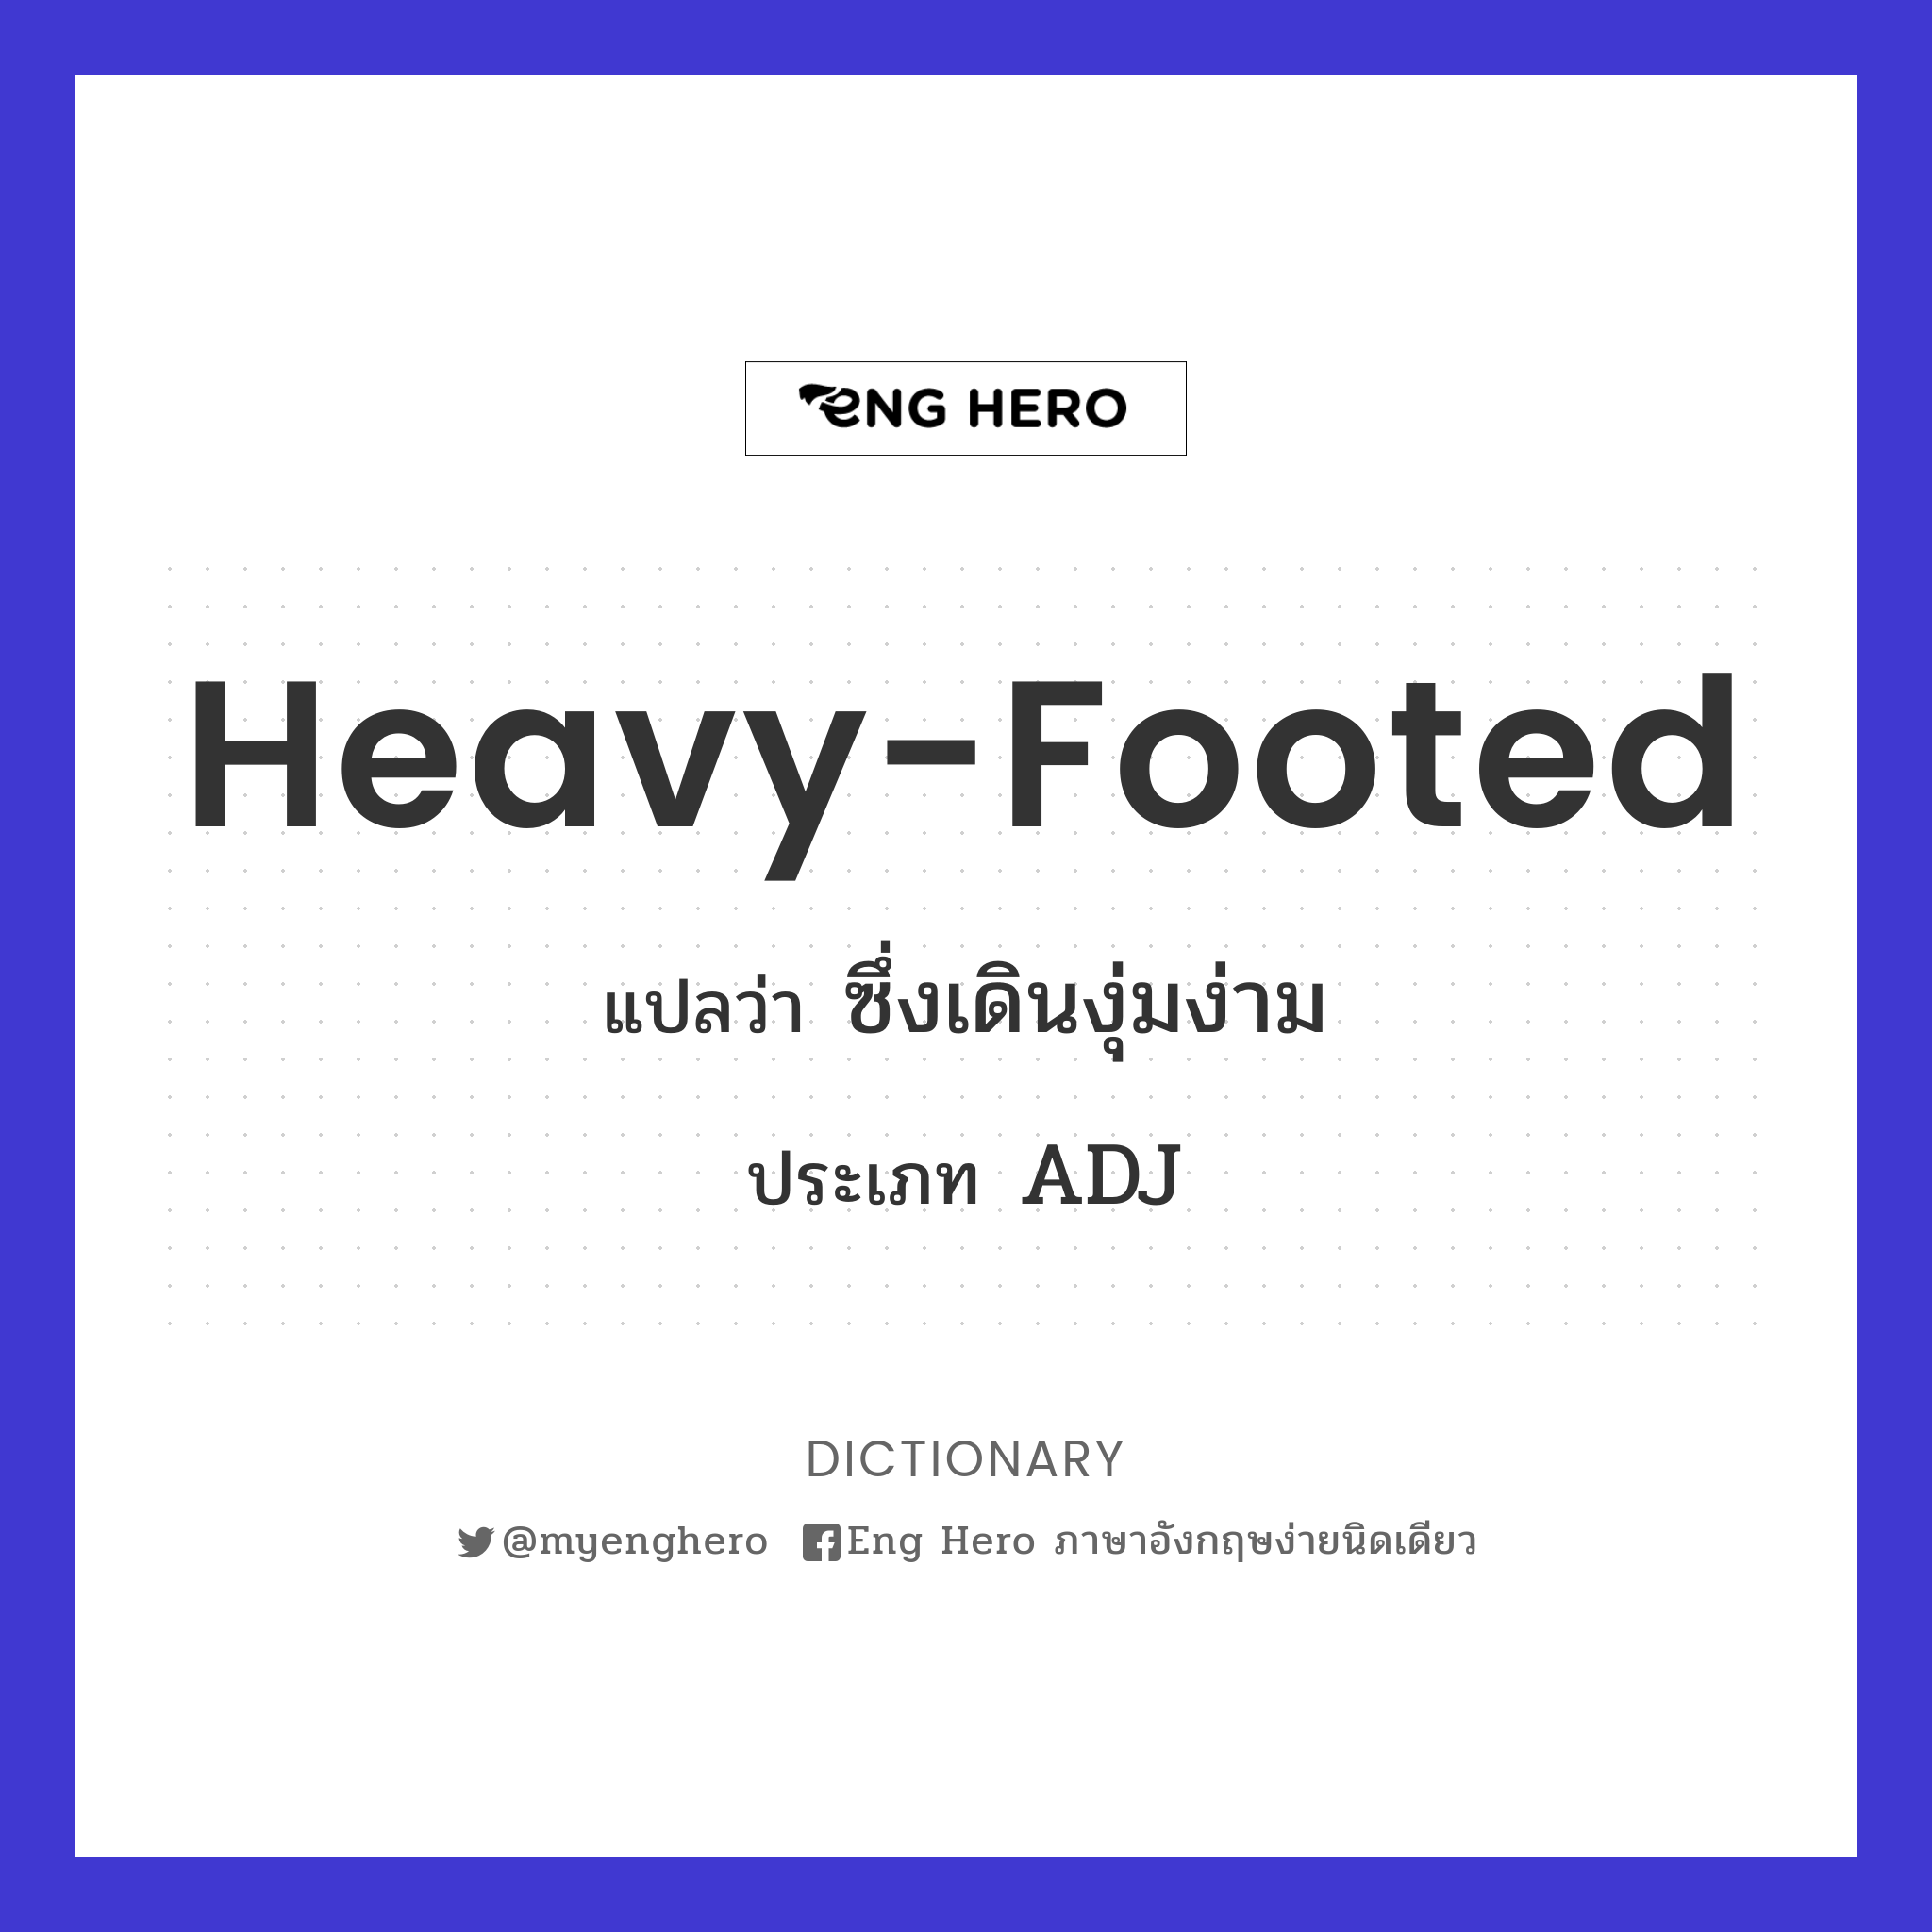 heavy-footed